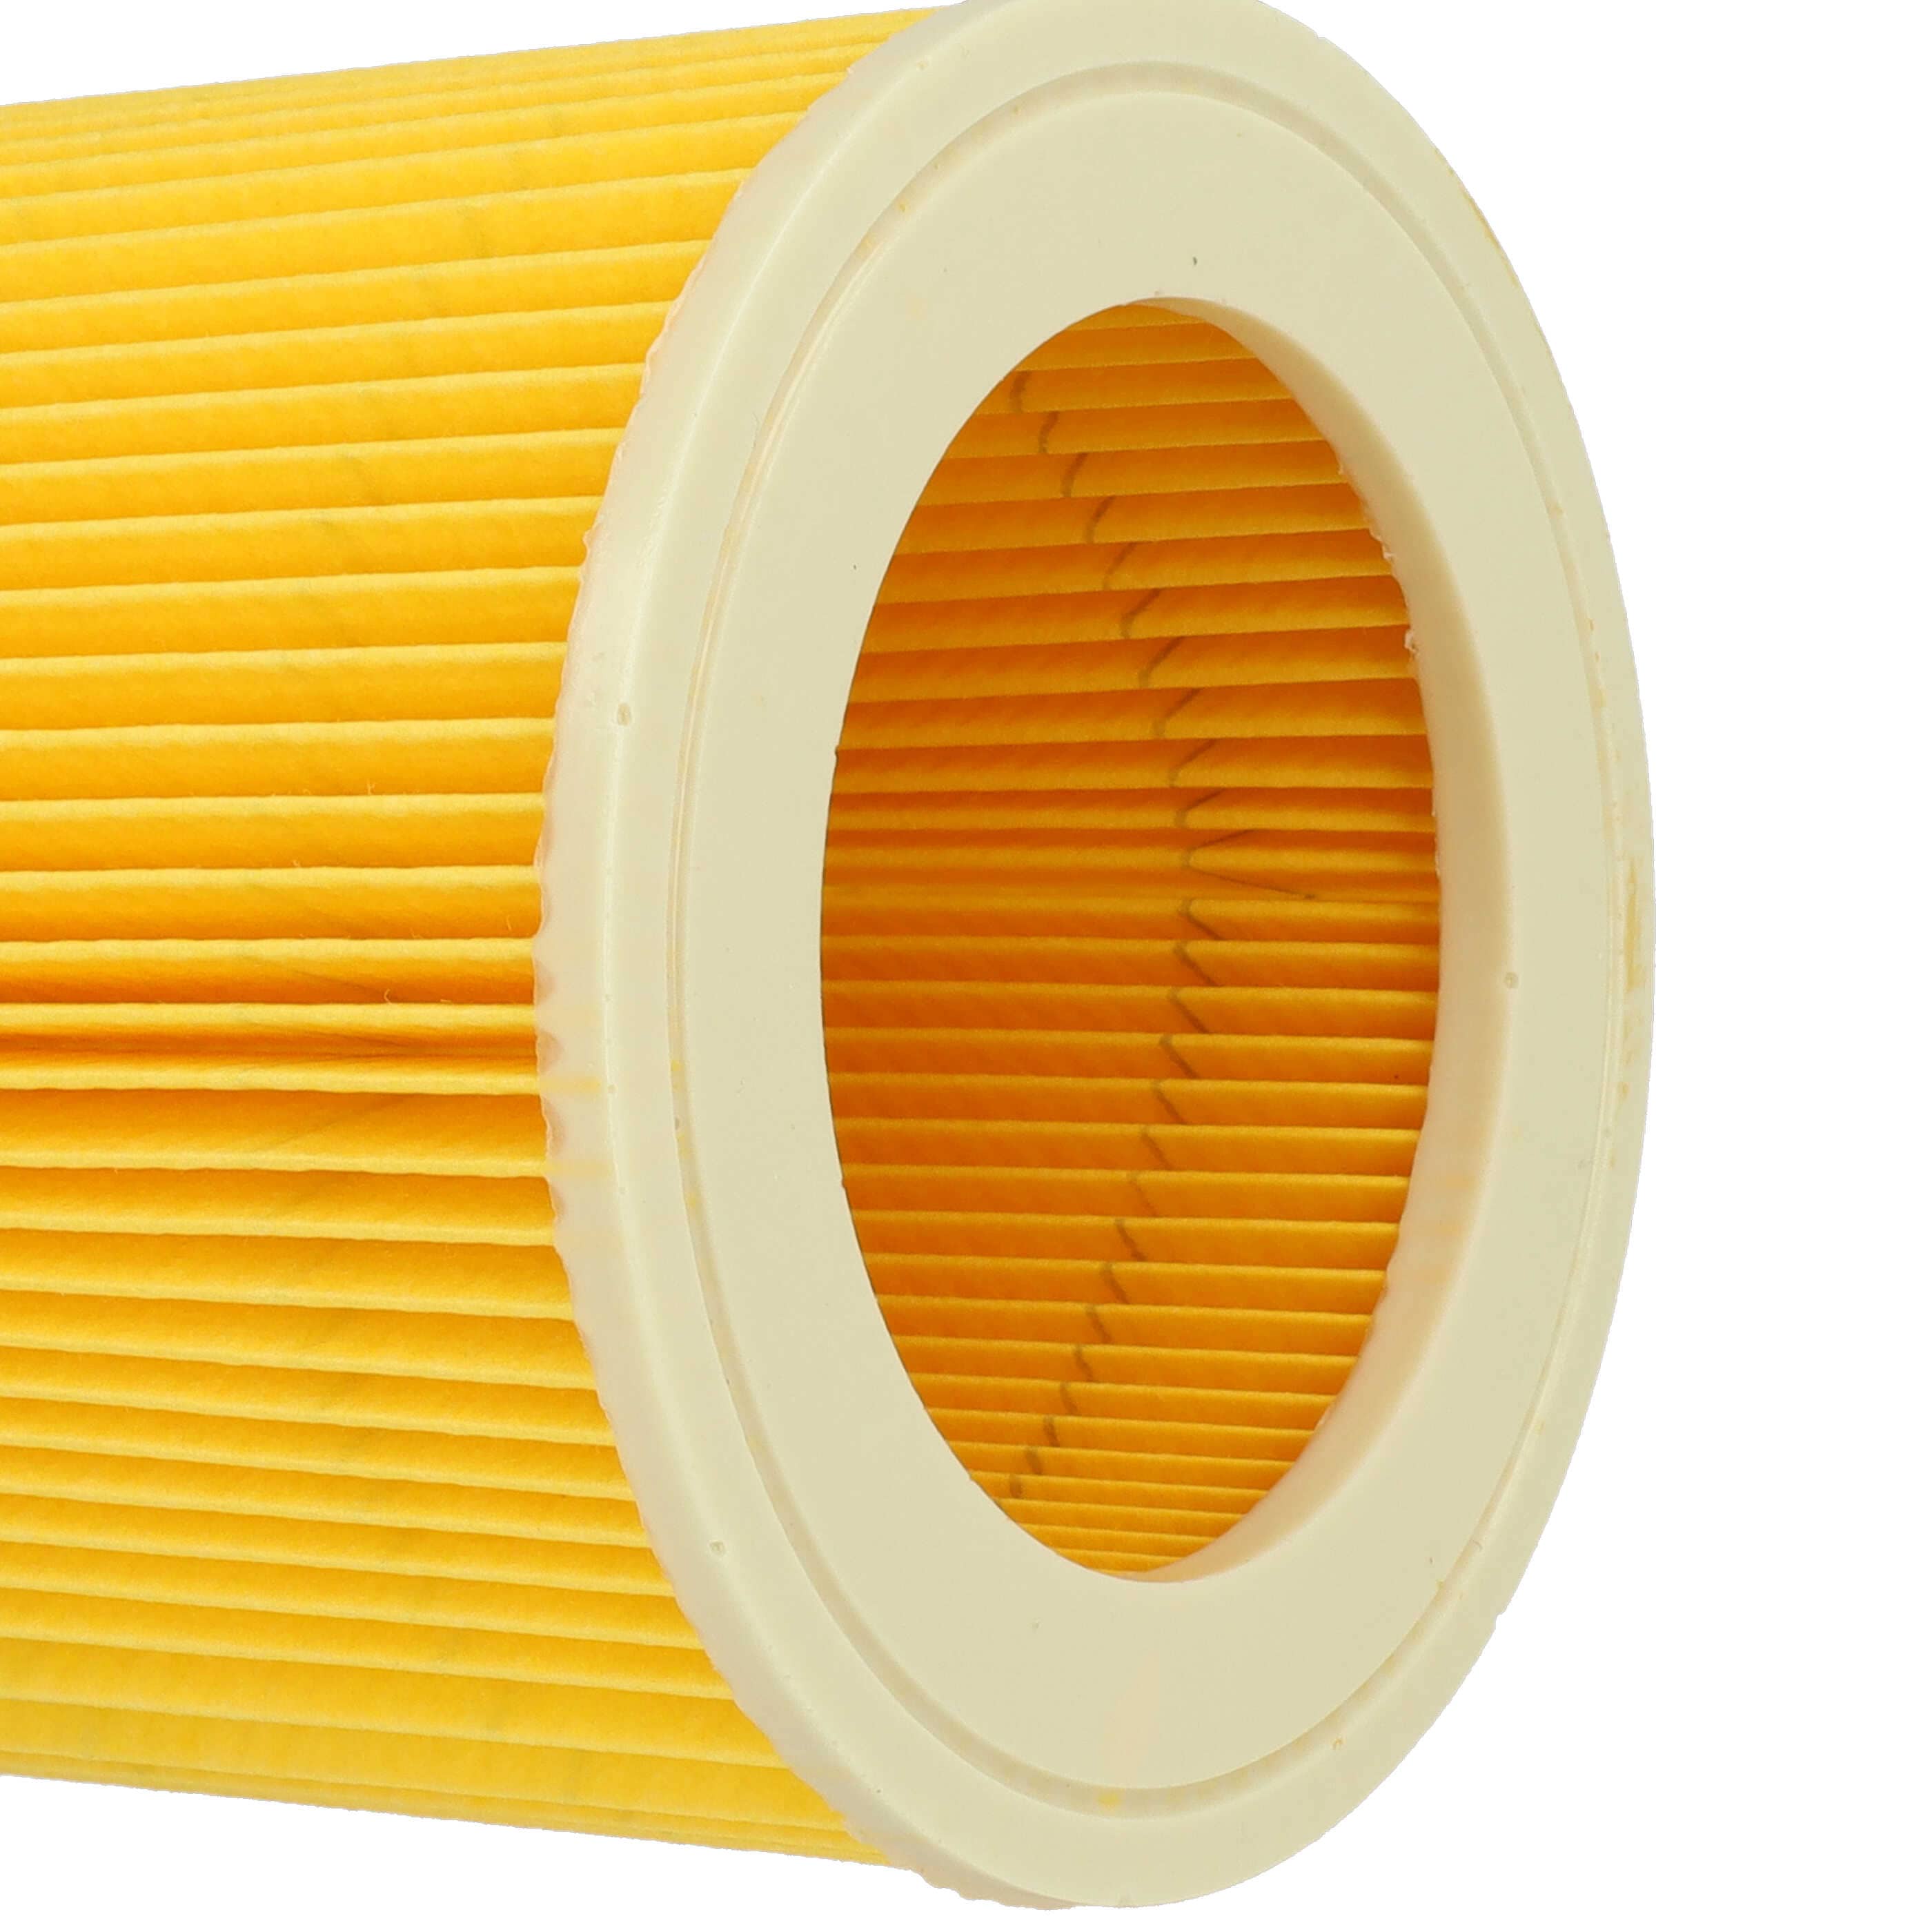 5x cartridge filter suitable for Kärcher 6.414-552.0, 2.863-303.0 for BaierVacuum Cleaner, yellow